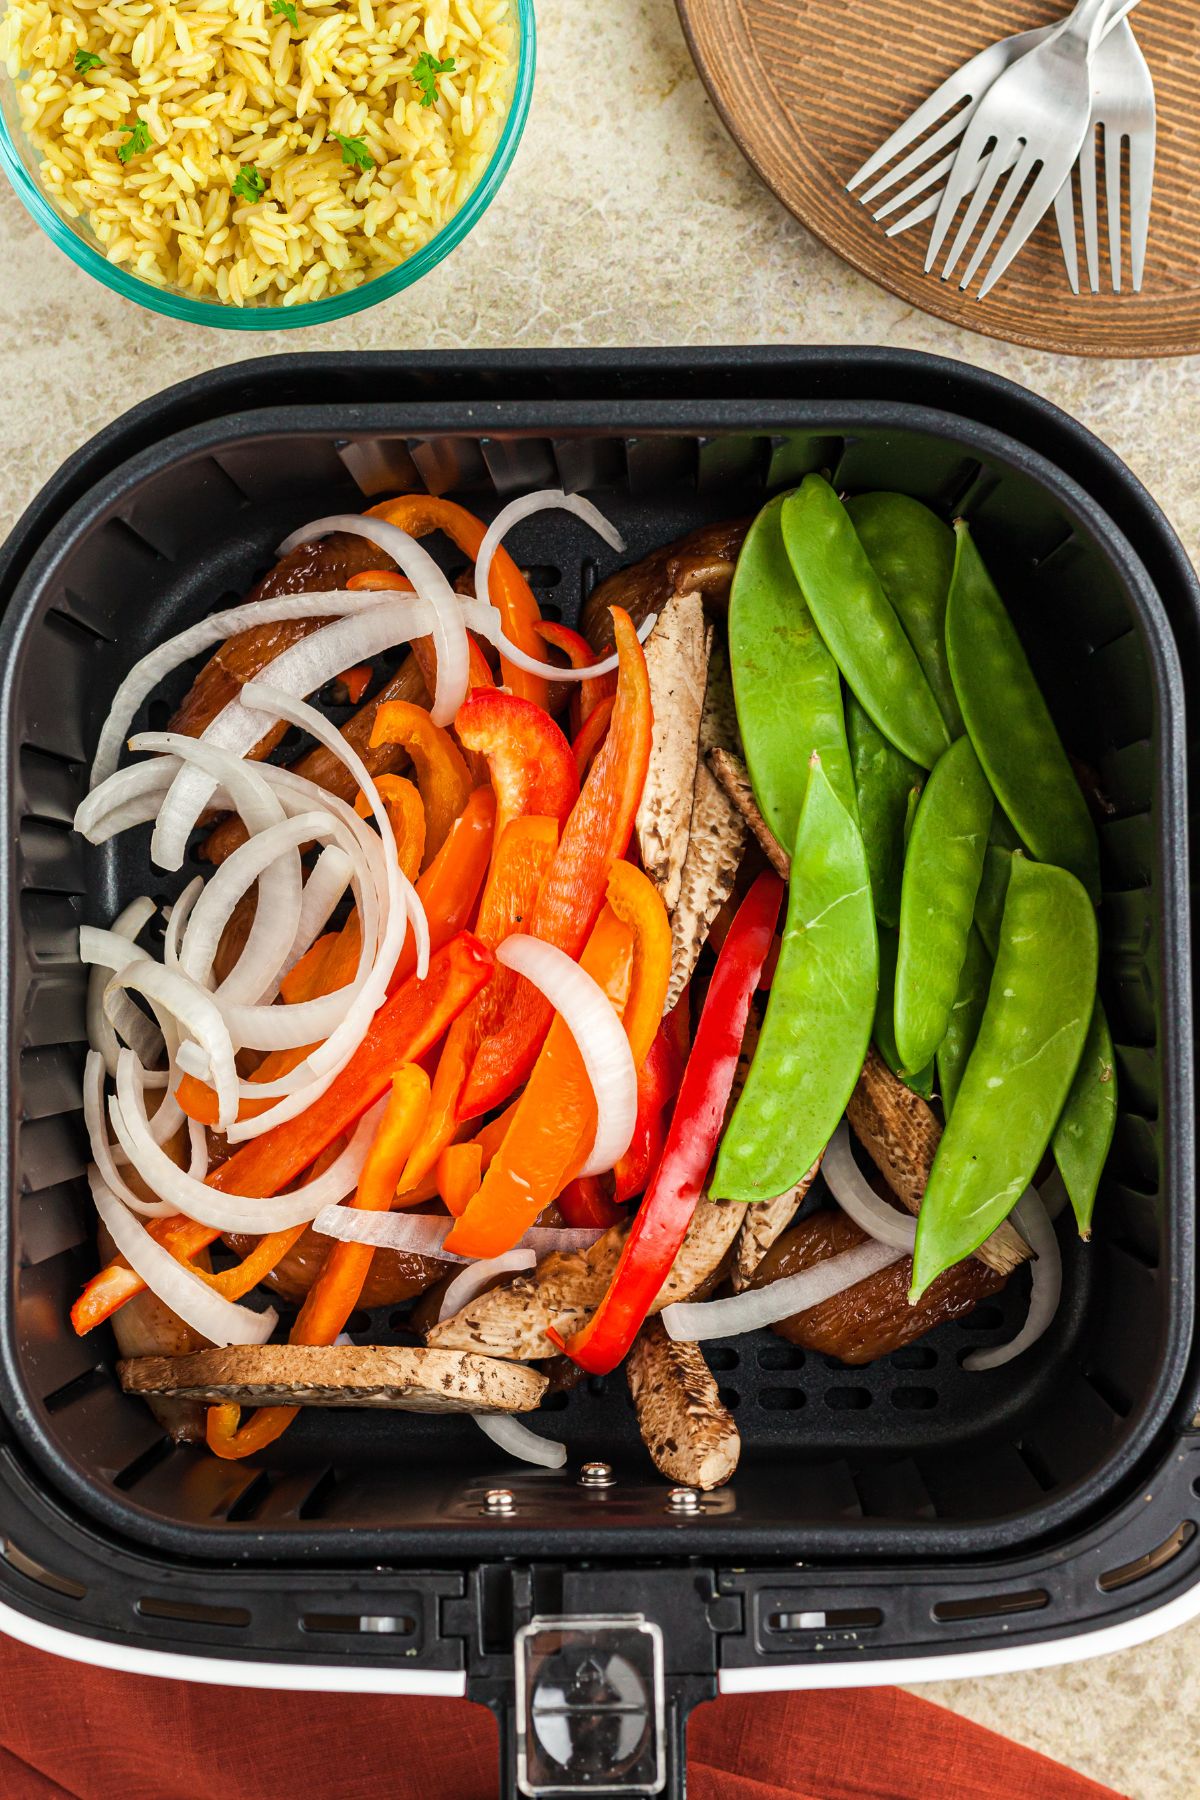 Uncooked vegetables and chicken in the air fryer basket